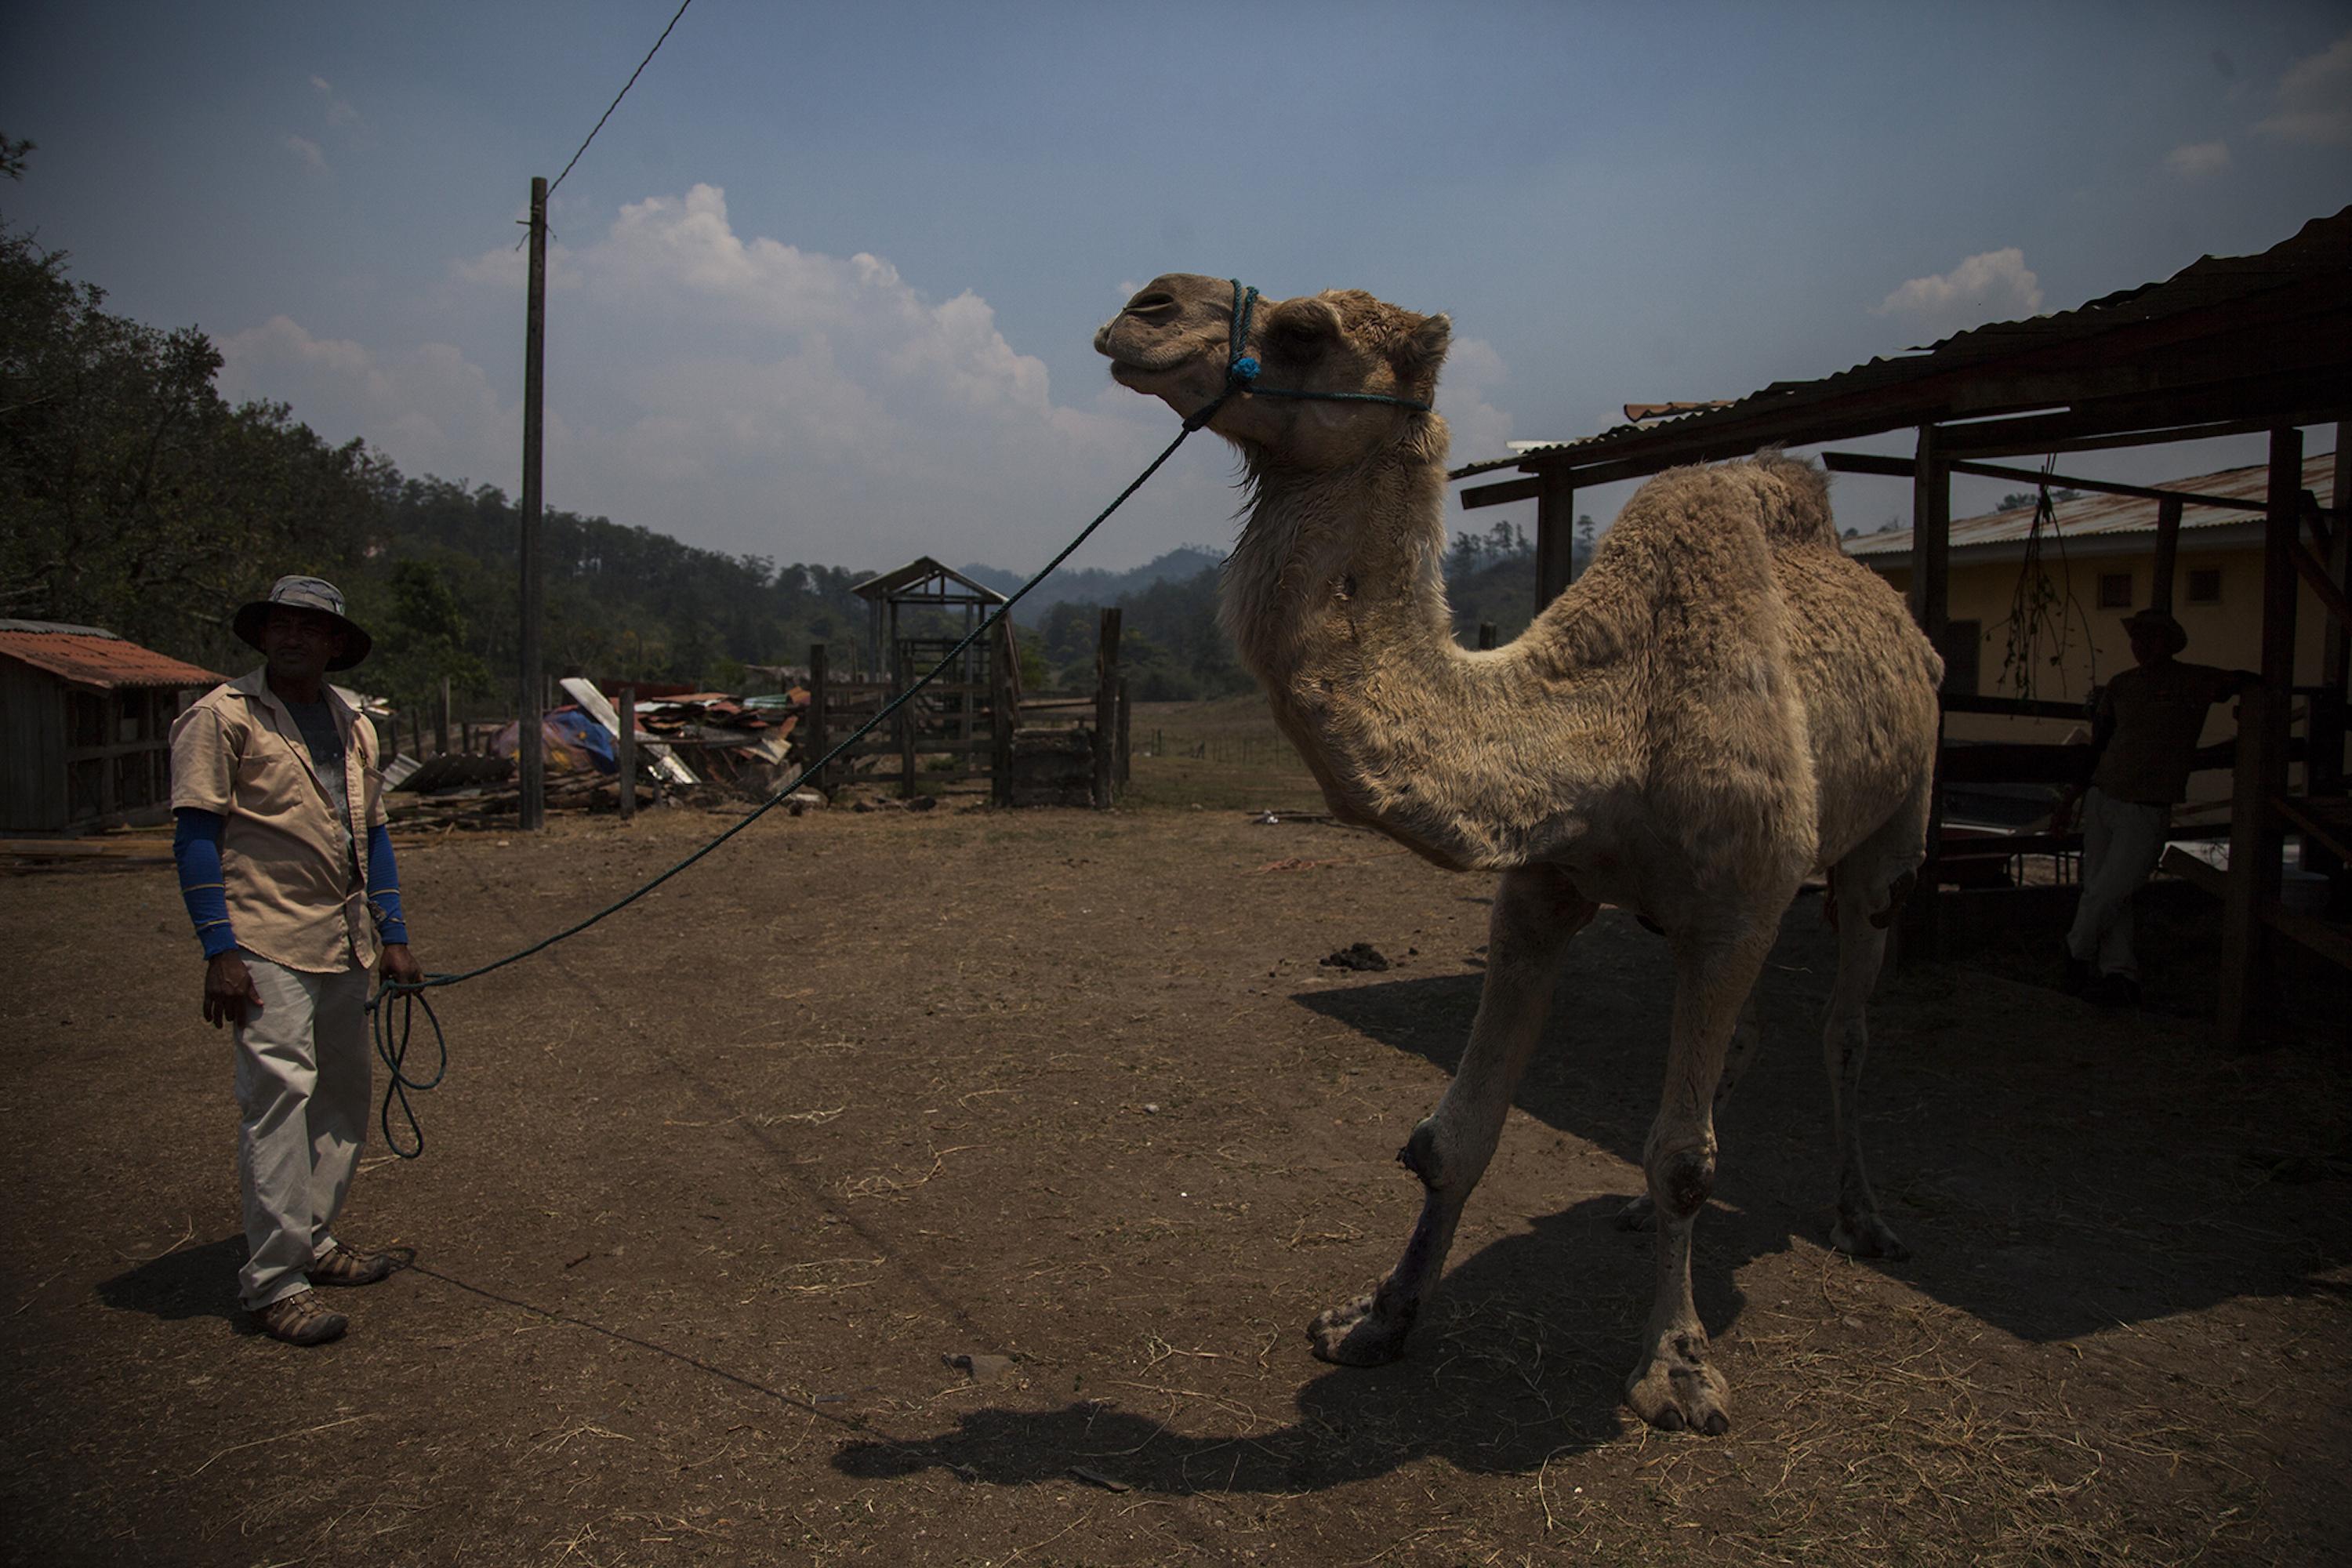 A circus gifted the Joya Grande zoo with a 25 year-old dromedary, the average age these animals live. Veterinarian María Díaz worries about the animal’s knee and belly wounds. She was placed in charge of the safari park when it was seized. Photo: Víctor Peña/El Faro